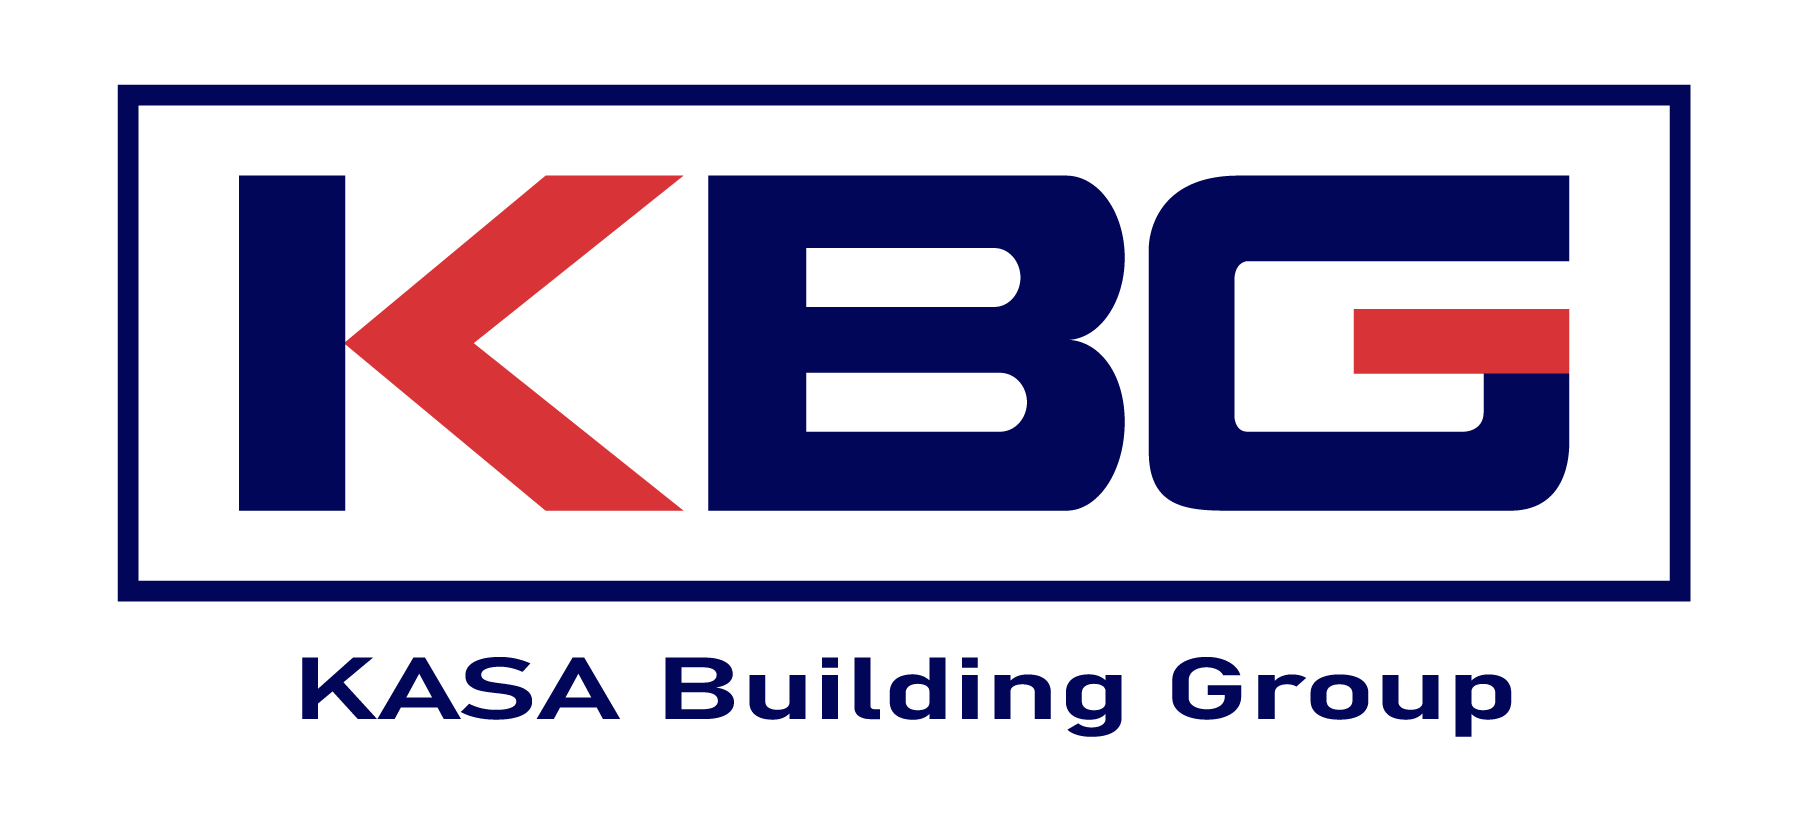 KASA Building Group KBG Civil & Commercial Construction for Government Constructions Logo